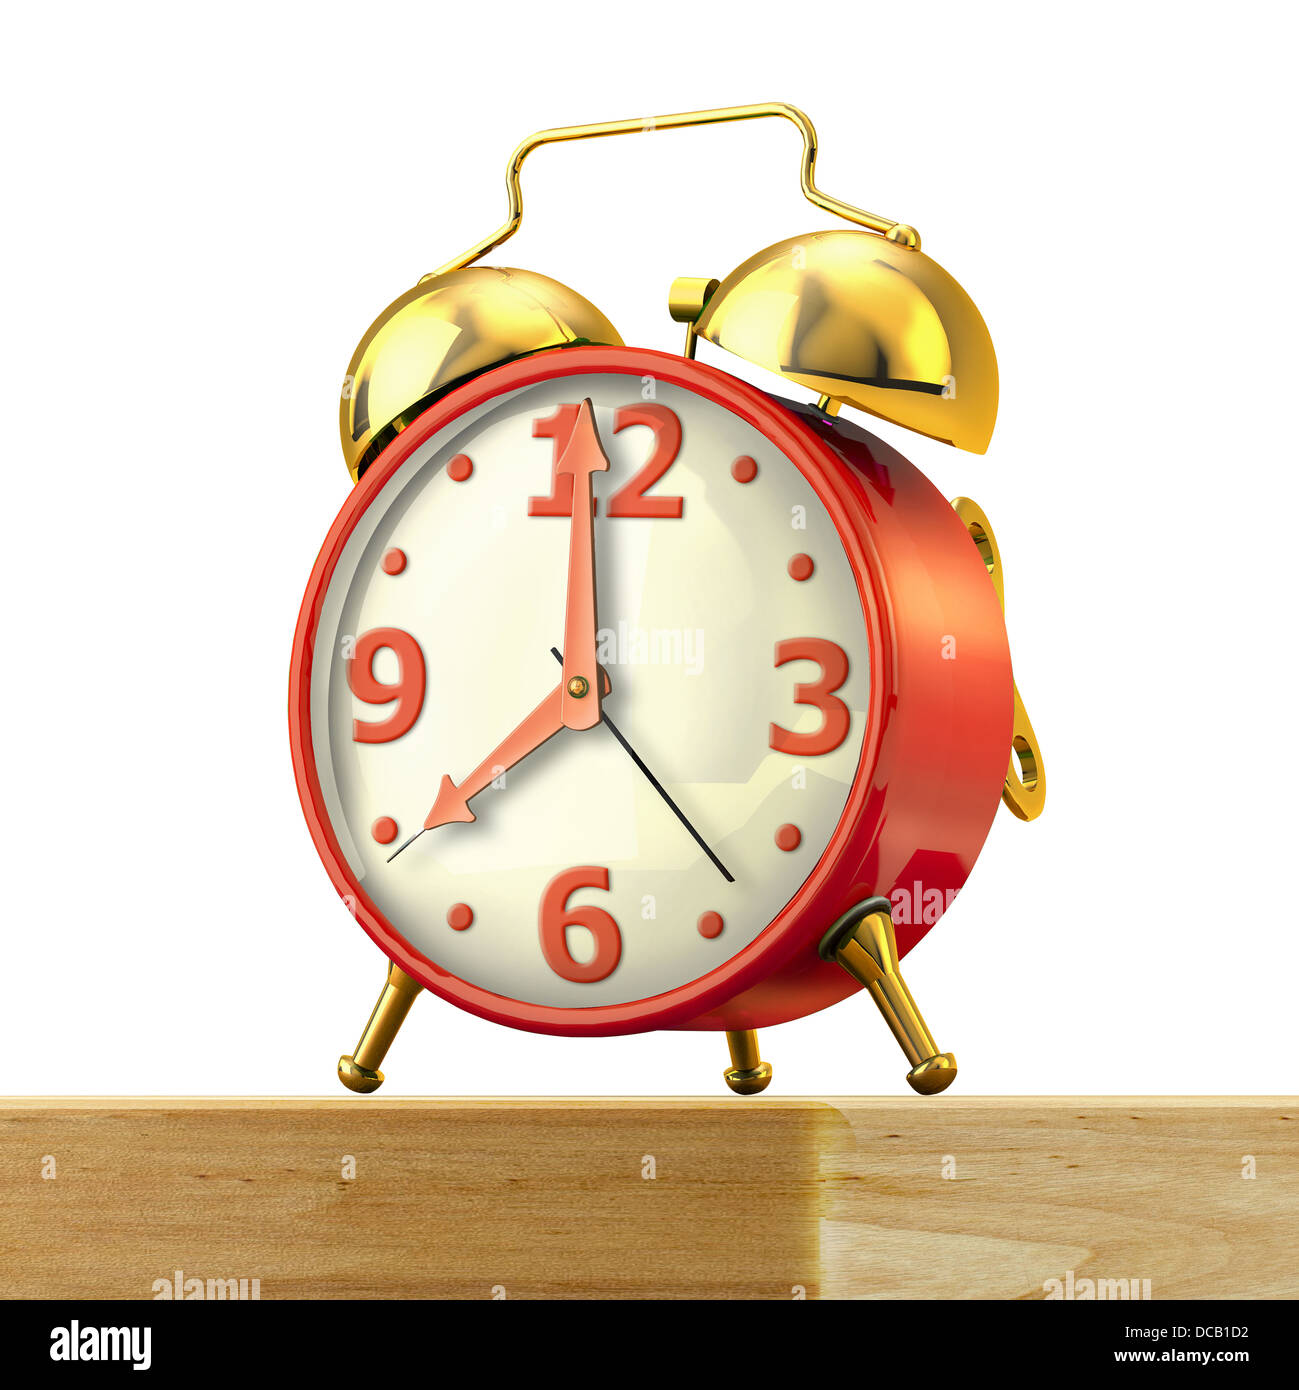 Classic alarm clock with red body and golden bells, on a wood table and white background, close up view. Clipping path included. Stock Photo